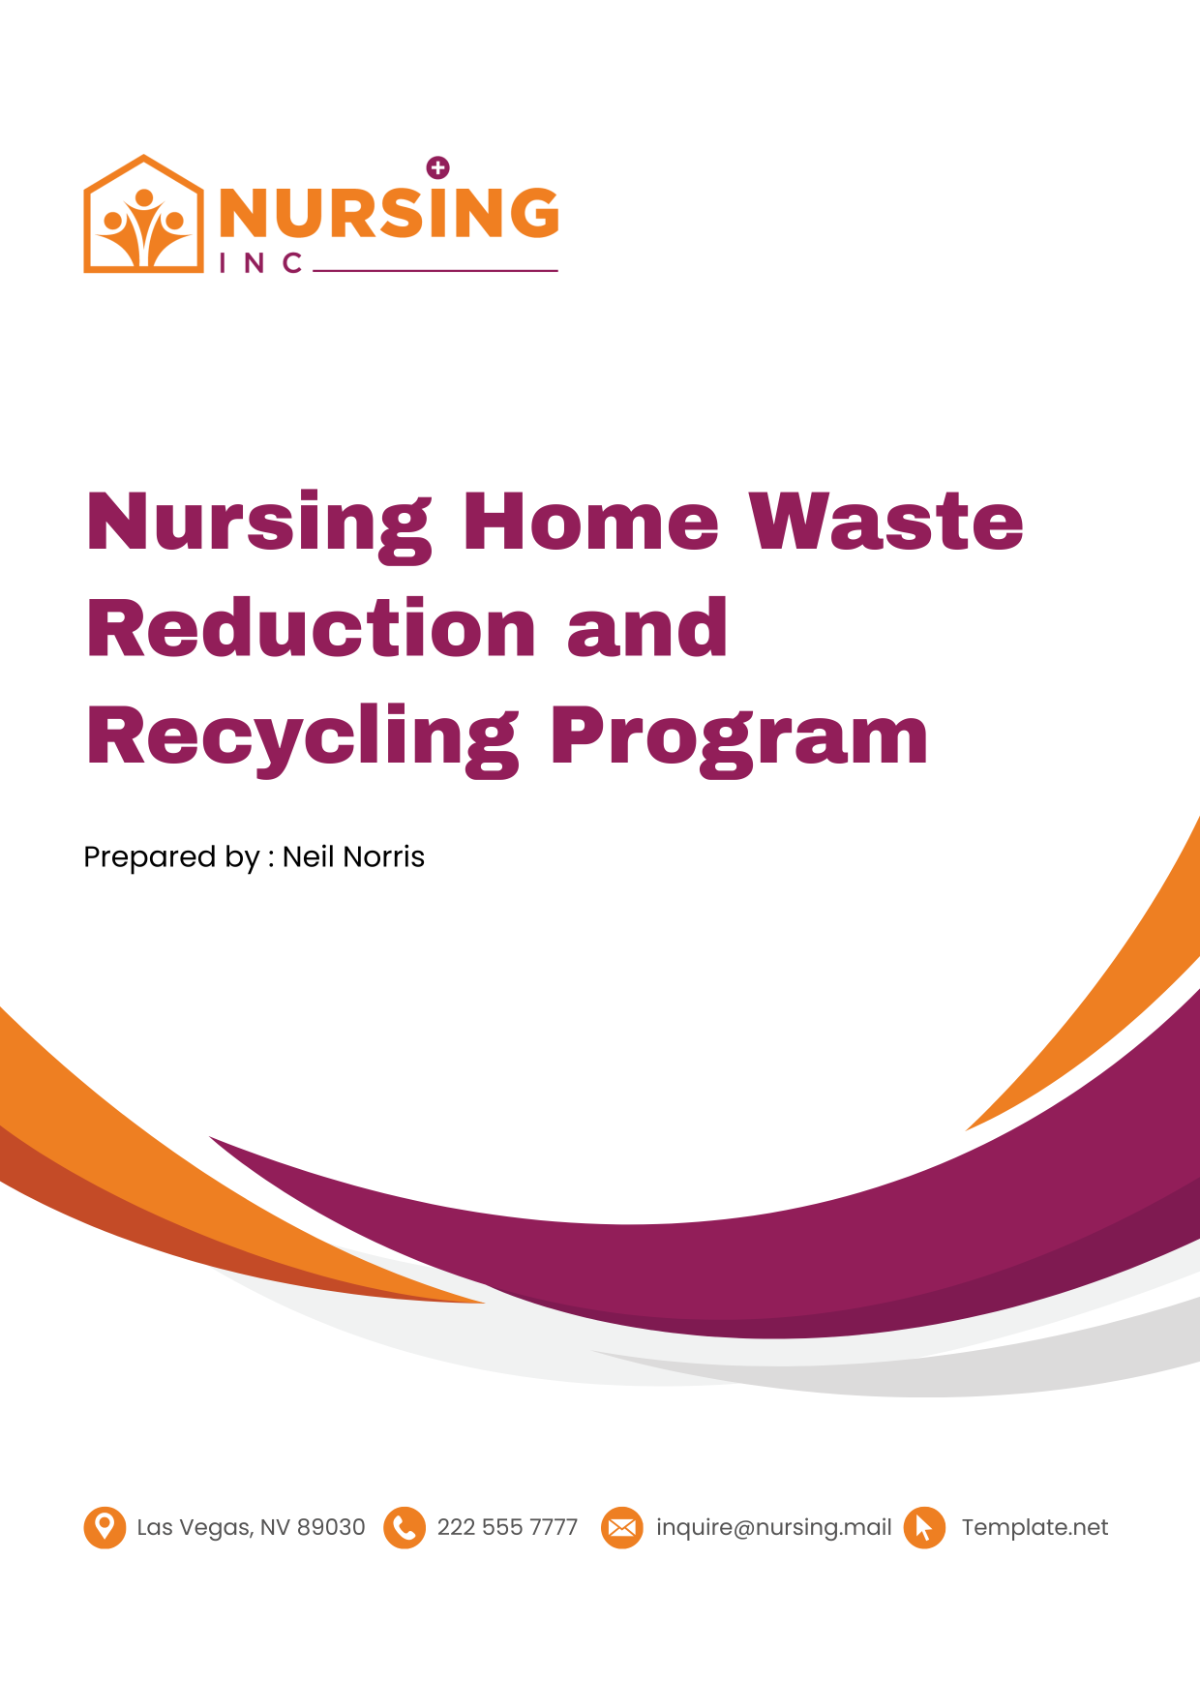 Nursing Home Waste Reduction and Recycling Program Template